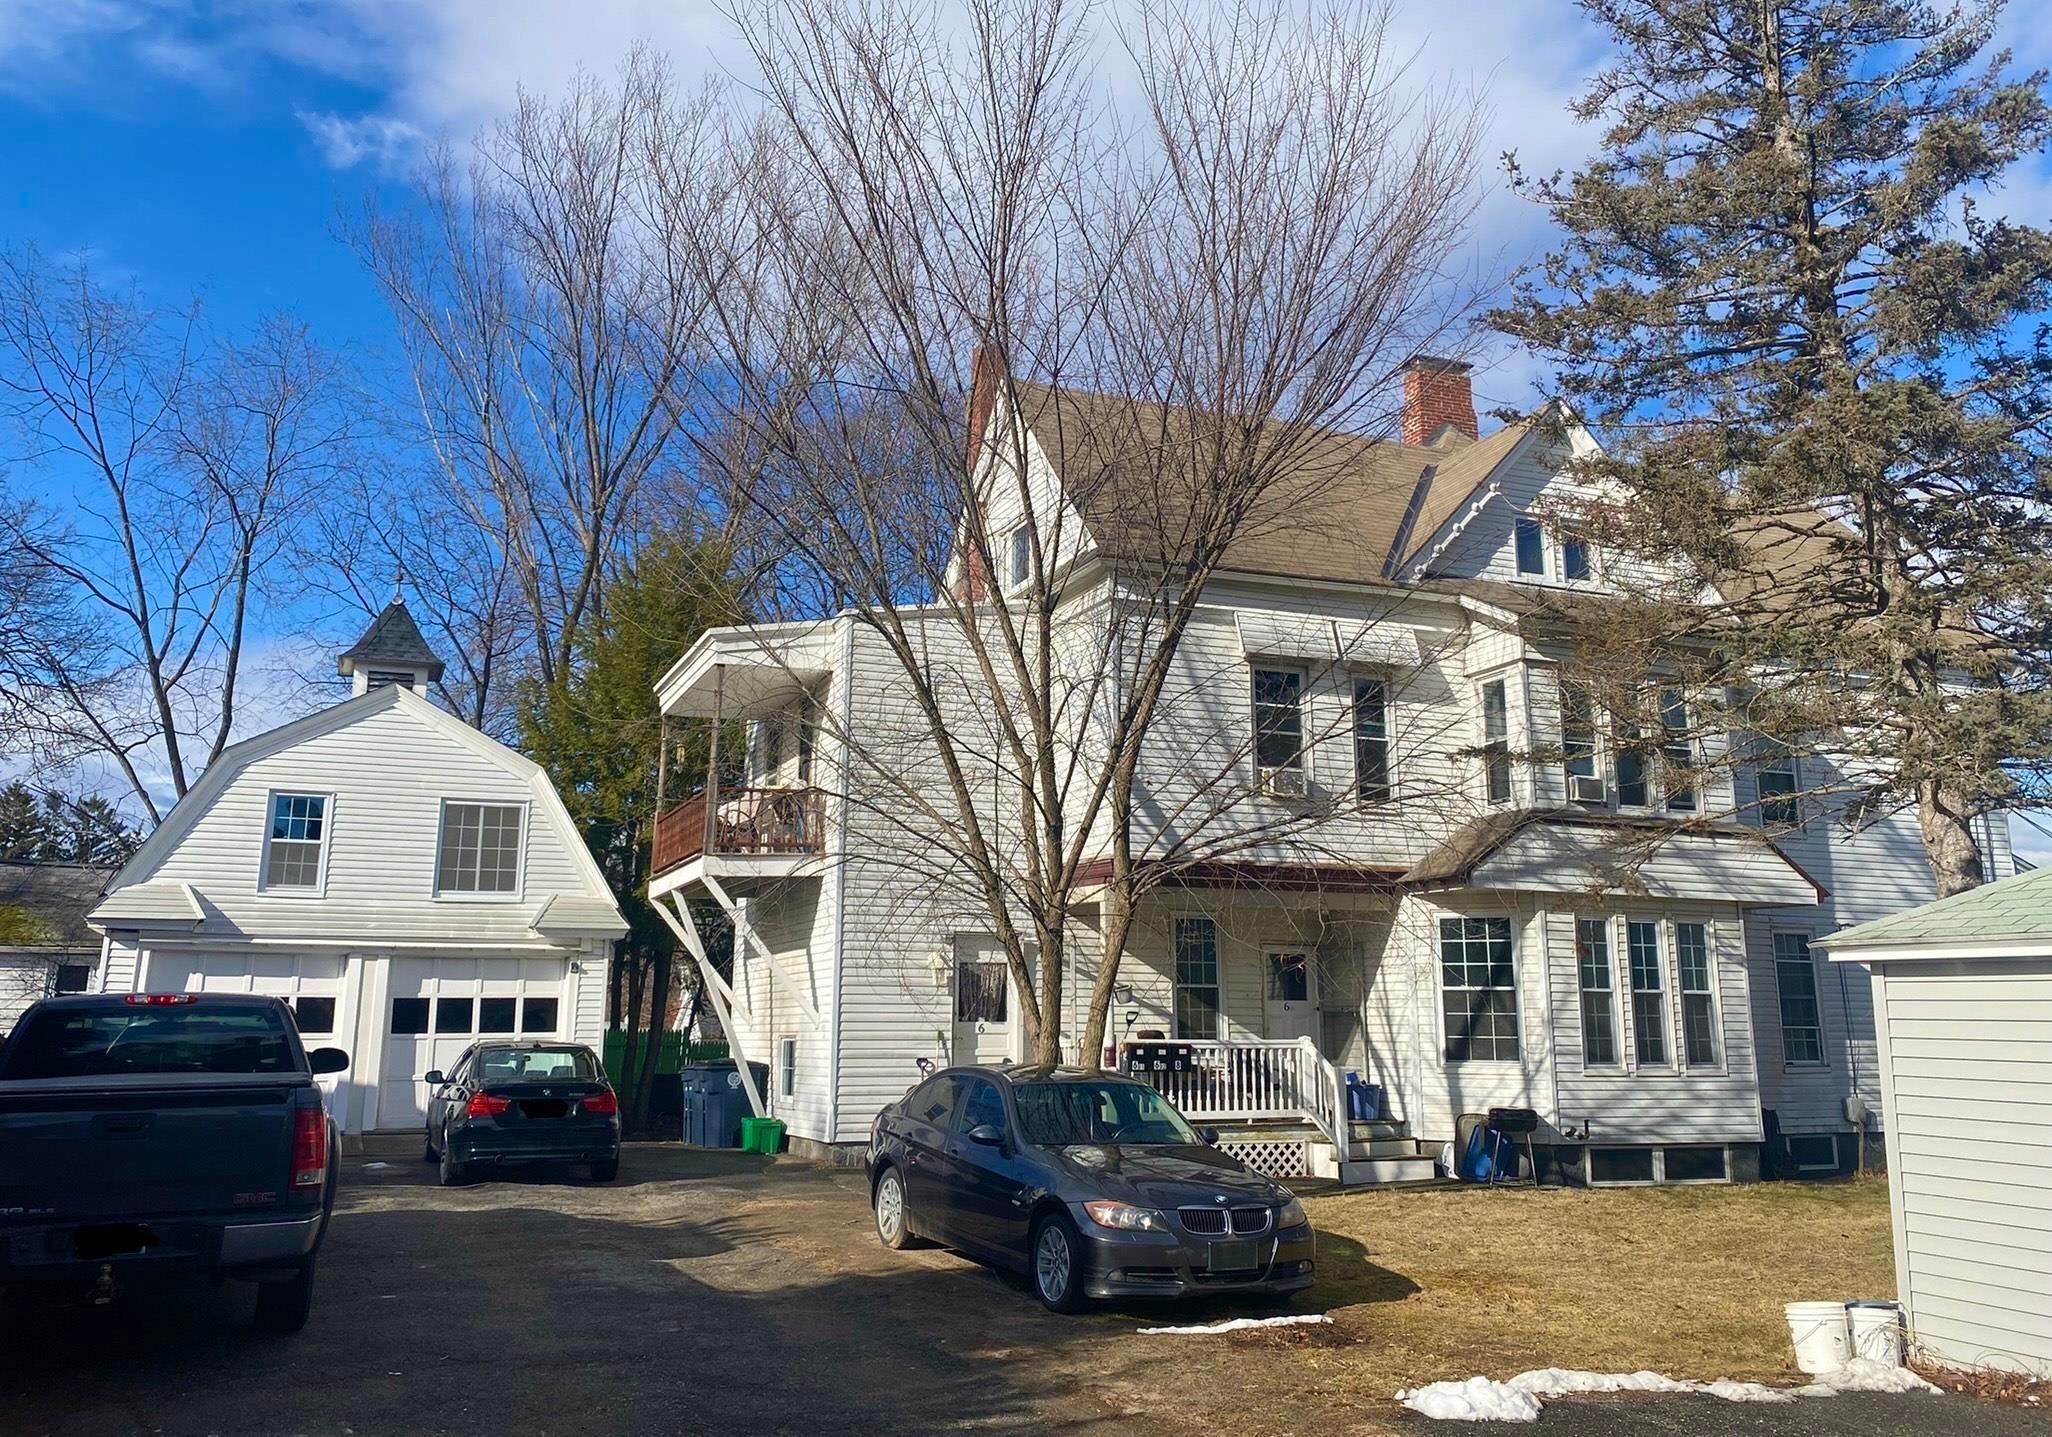 2. Multi Family for Sale at Nashua, NH 03064